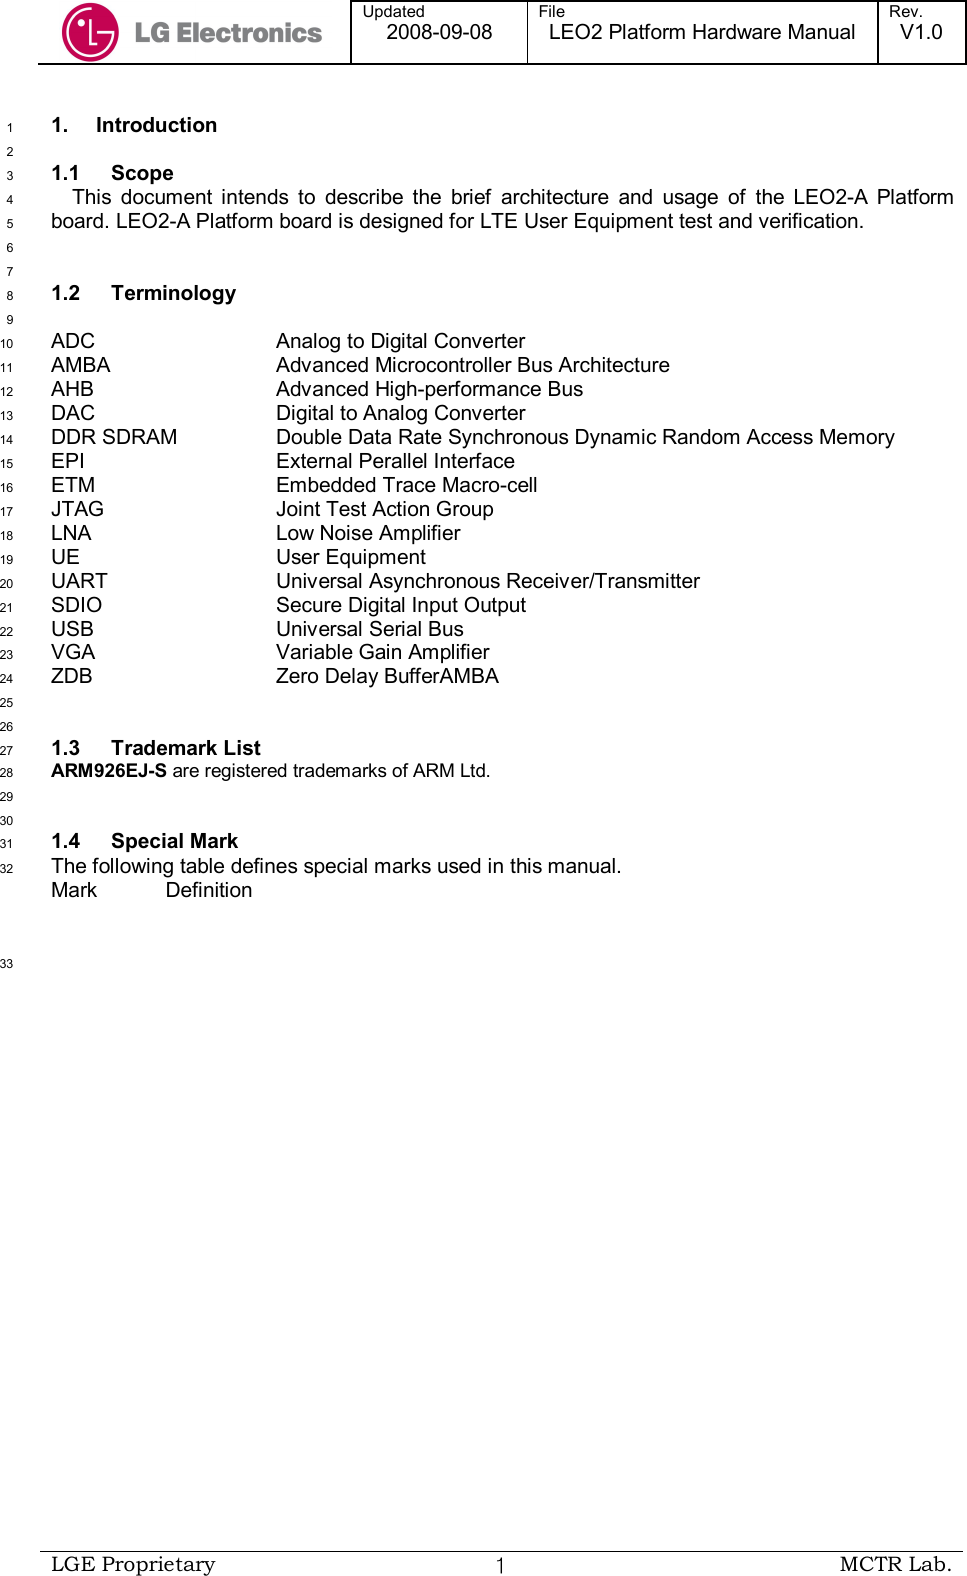  Updated 2008-09-08 File LEO2 Platform Hardware Manual Rev. V1.0   LGE Proprietary  １ MCTR Lab.  1.  Introduction 1  2 1.1  Scope 3 This  document  intends  to  describe  the  brief  architecture  and  usage  of  the  LEO2-A  Platform 4 board. LEO2-A Platform board is designed for LTE User Equipment test and verification.  5  6  7 1.2  Terminology 8  9 ADC      Analog to Digital Converter 10 AMBA      Advanced Microcontroller Bus Architecture 11 AHB      Advanced High-performance Bus 12 DAC      Digital to Analog Converter 13 DDR SDRAM    Double Data Rate Synchronous Dynamic Random Access Memory 14 EPI      External Perallel Interface 15 ETM      Embedded Trace Macro-cell 16 JTAG      Joint Test Action Group 17 LNA      Low Noise Amplifier 18 UE      User Equipment 19 UART       Universal Asynchronous Receiver/Transmitter 20 SDIO      Secure Digital Input Output 21 USB       Universal Serial Bus 22 VGA      Variable Gain Amplifier 23 ZDB      Zero Delay BufferAMBA 24  25  26 1.3  Trademark List 27 ARM926EJ-S are registered trademarks of ARM Ltd. 28  29  30 1.4  Special Mark 31 The following table defines special marks used in this manual. 32 Mark  Definition        33 